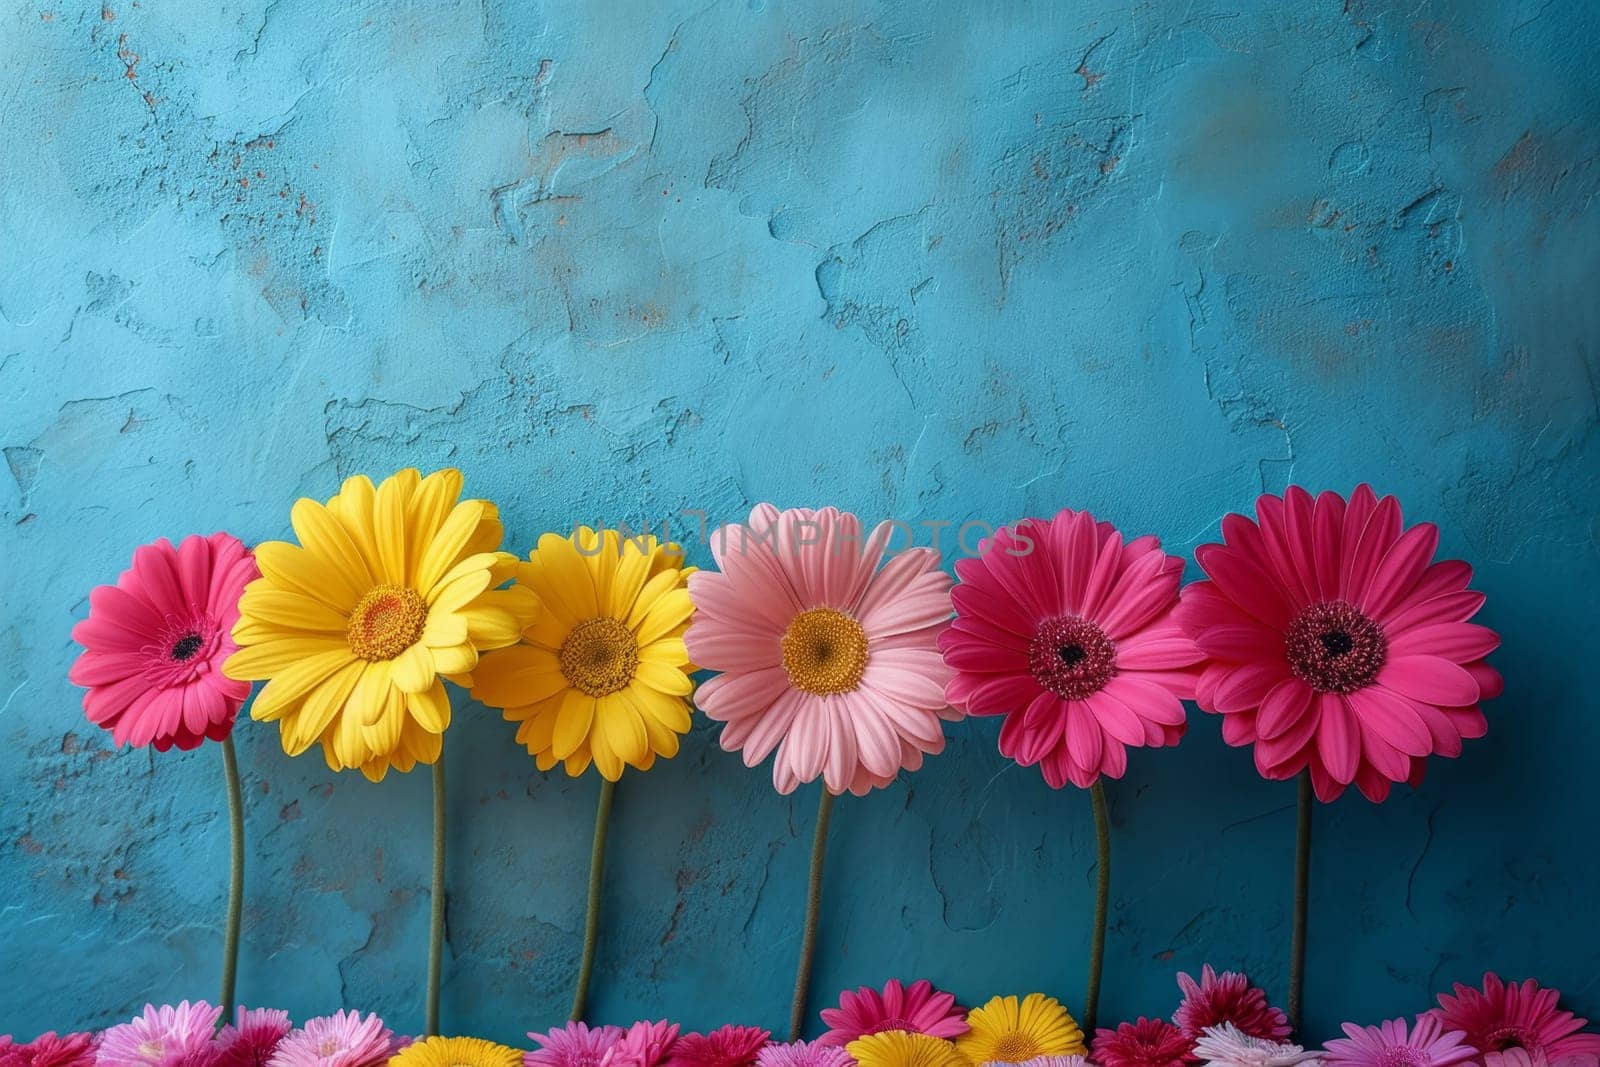 Colorful floral arrangement of flowers with a blue background.